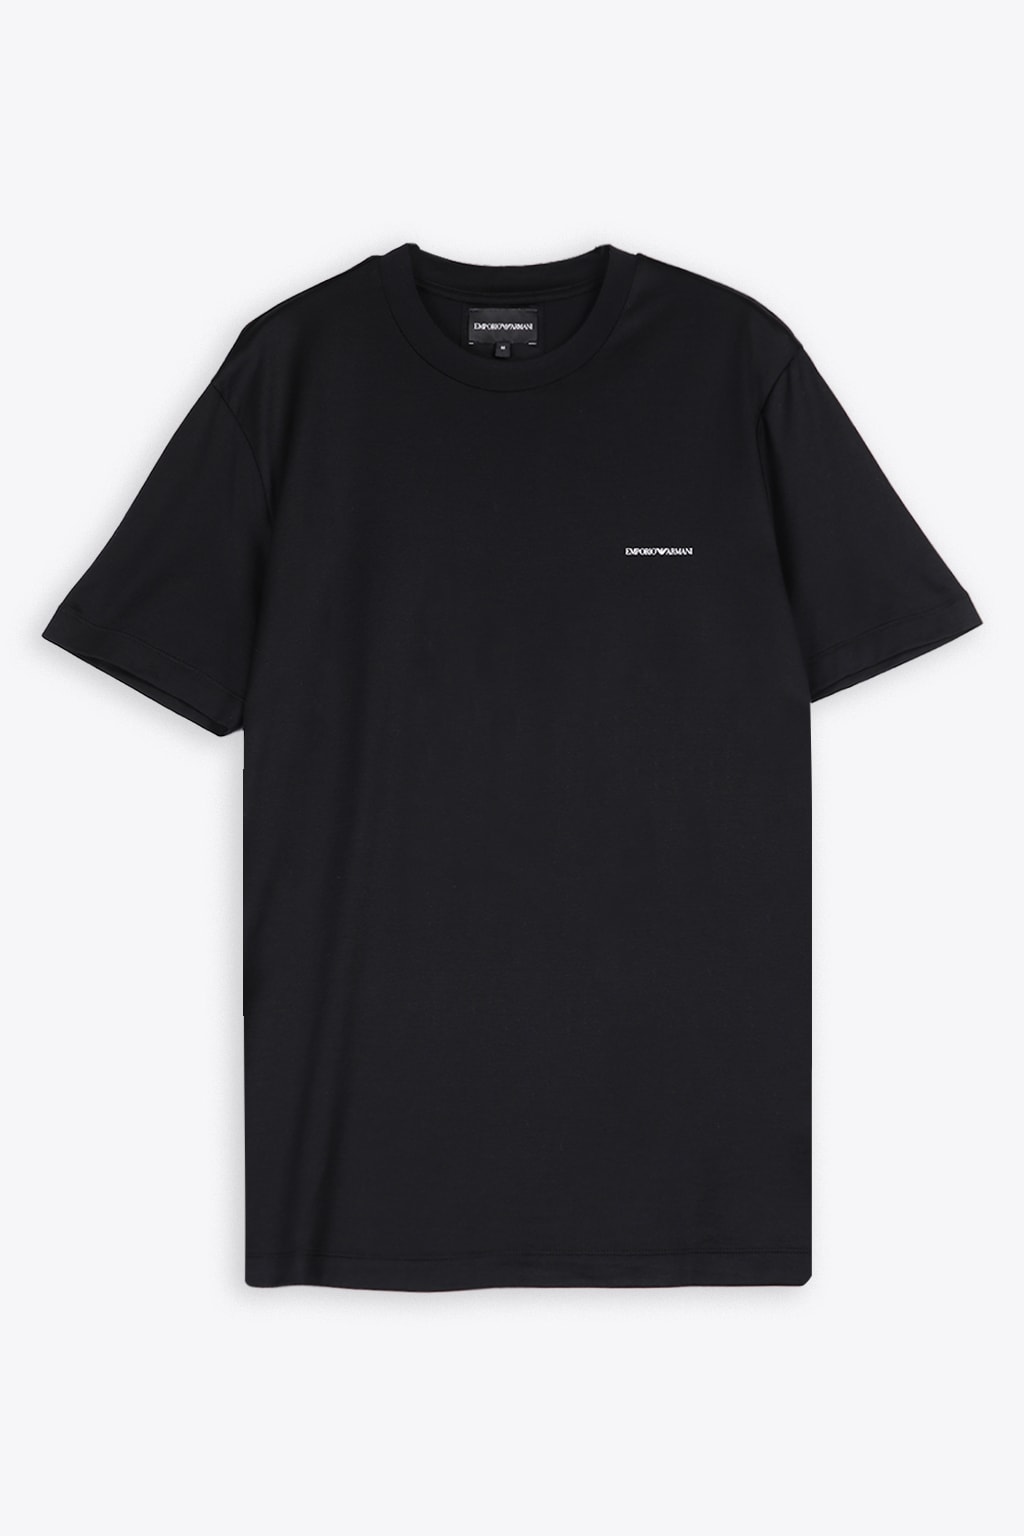 EMPORIO ARMANI T-SHIRT BLACK LYOCELL T-SHIRT WITH CHEST LOGO